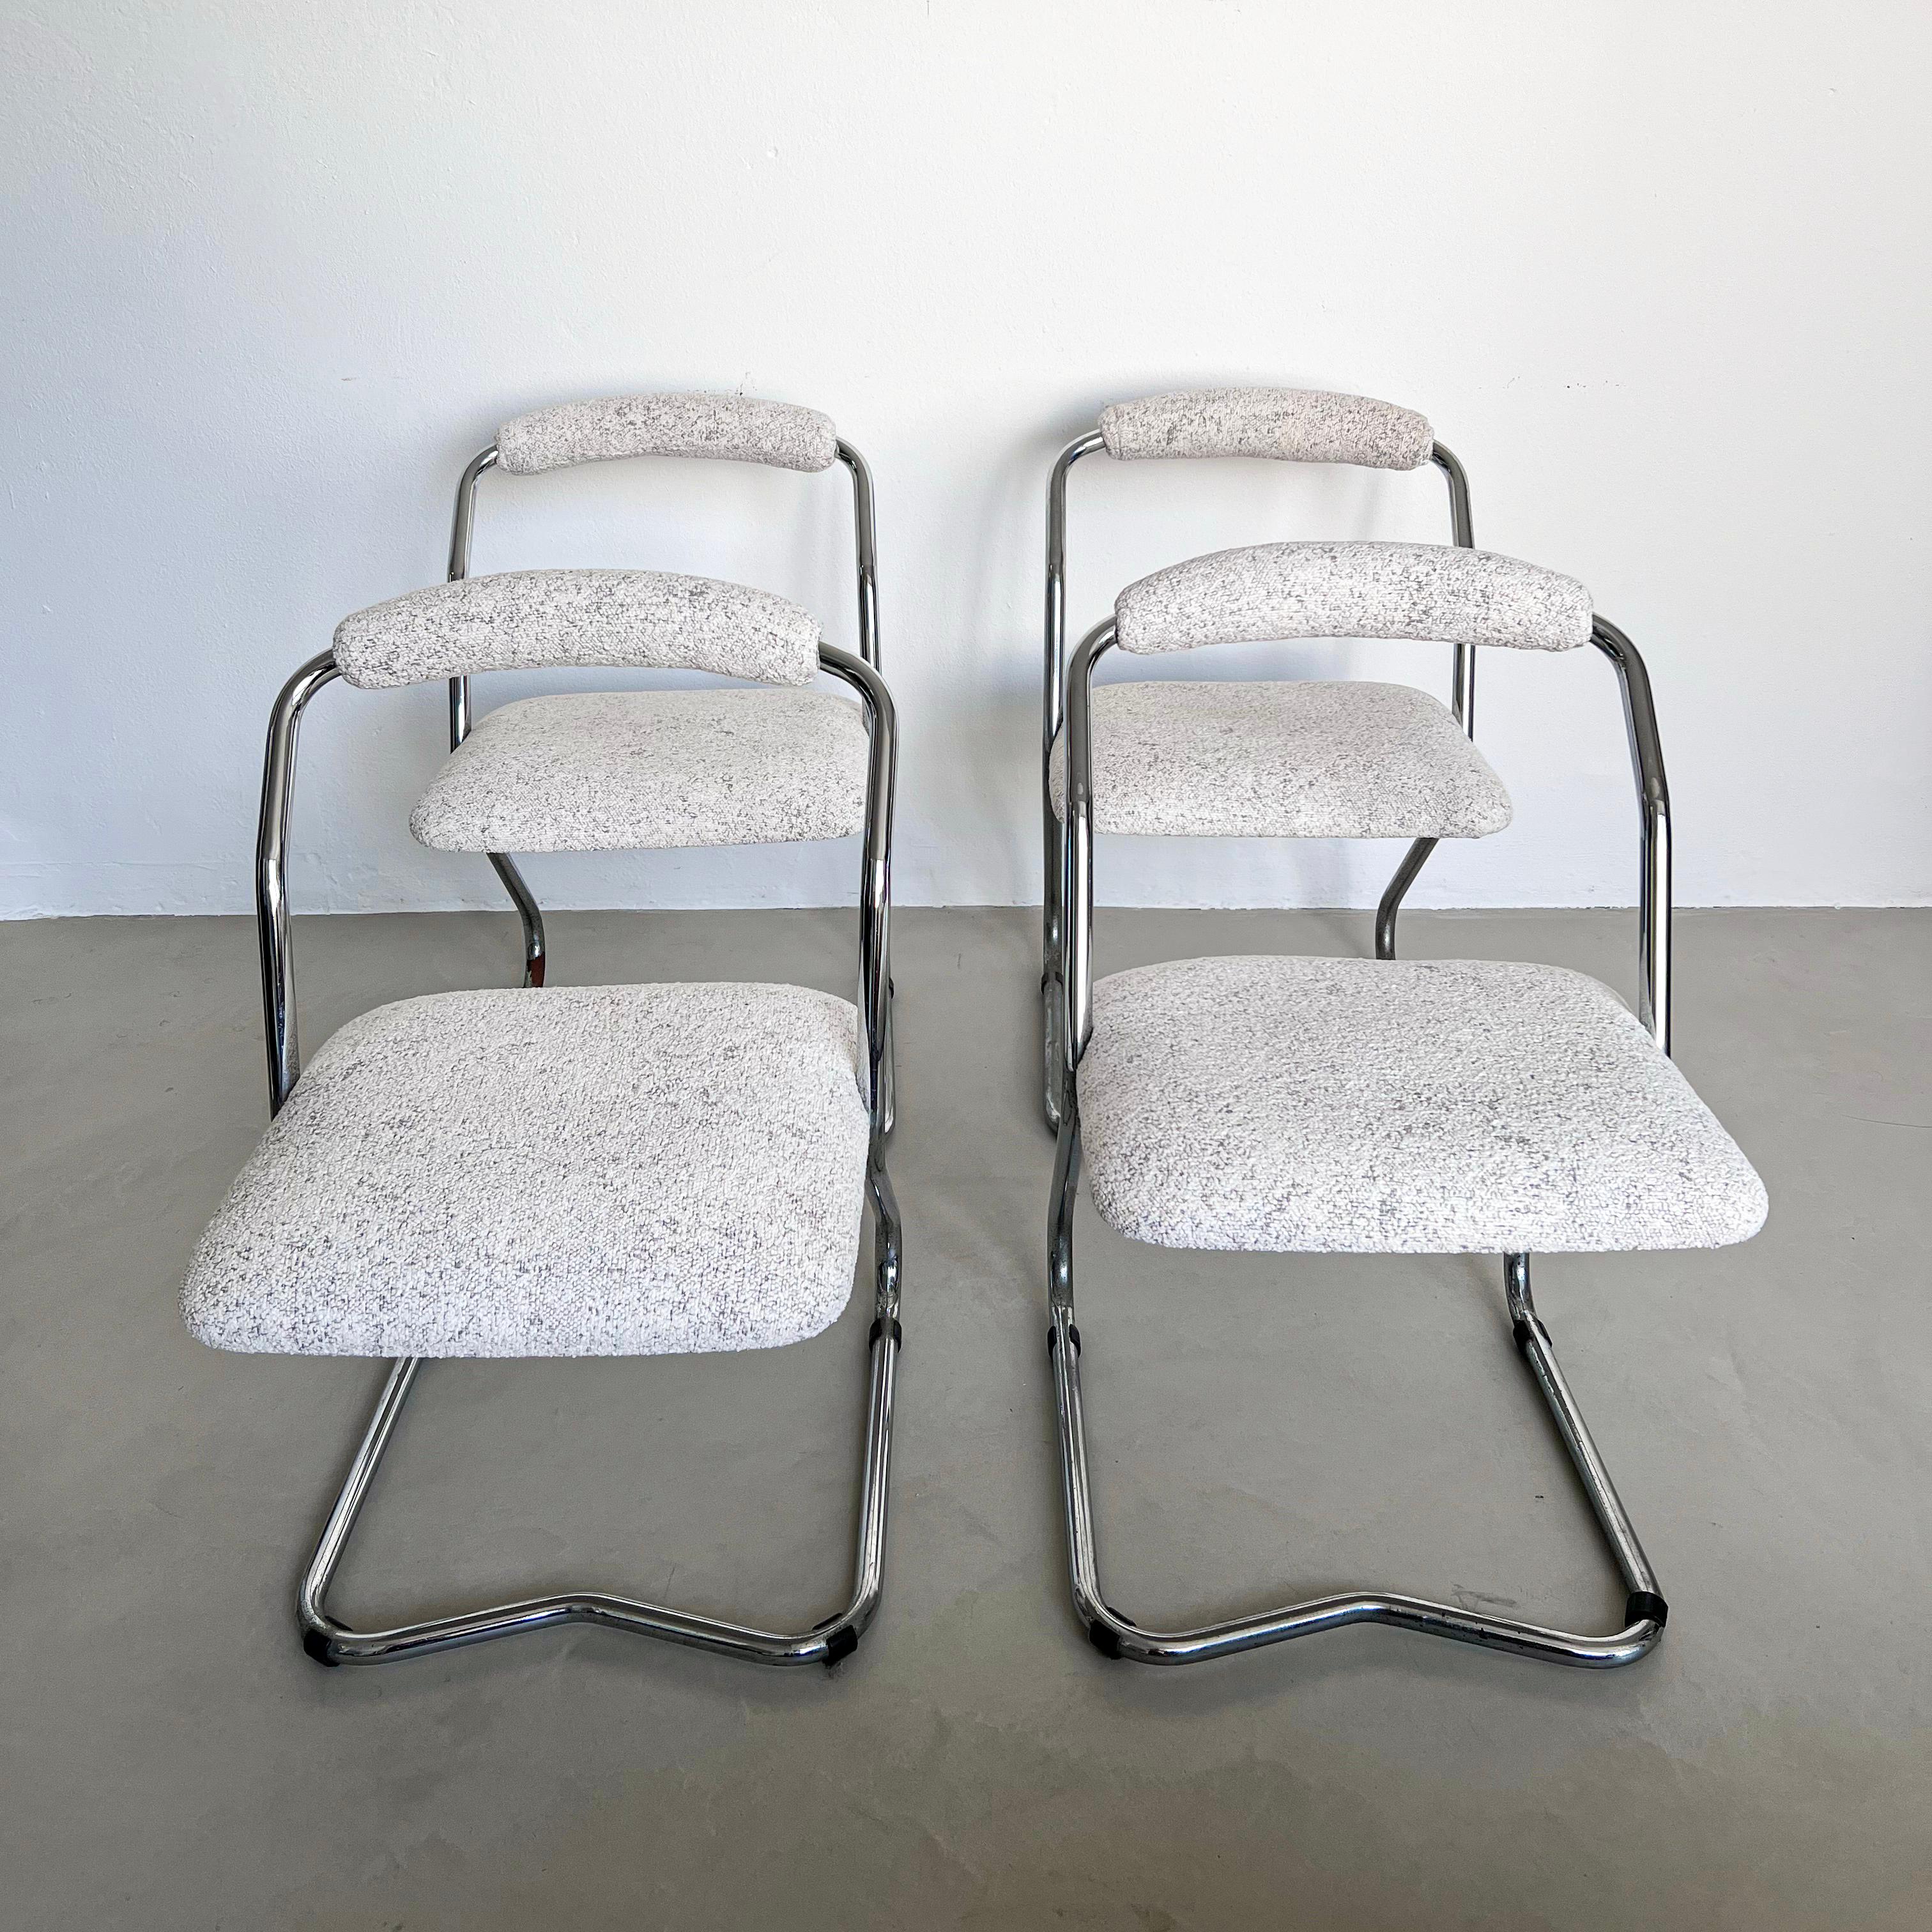 Decorative Dining Chairs - White Bouclé Chairs - Chromed Cantilever Chairs

Set of four Mid-Century Modern / Space Age dining chairs, with a decorative continuous tubular frame in chromed metal, upholstered seat and upholstered roll backrest. The